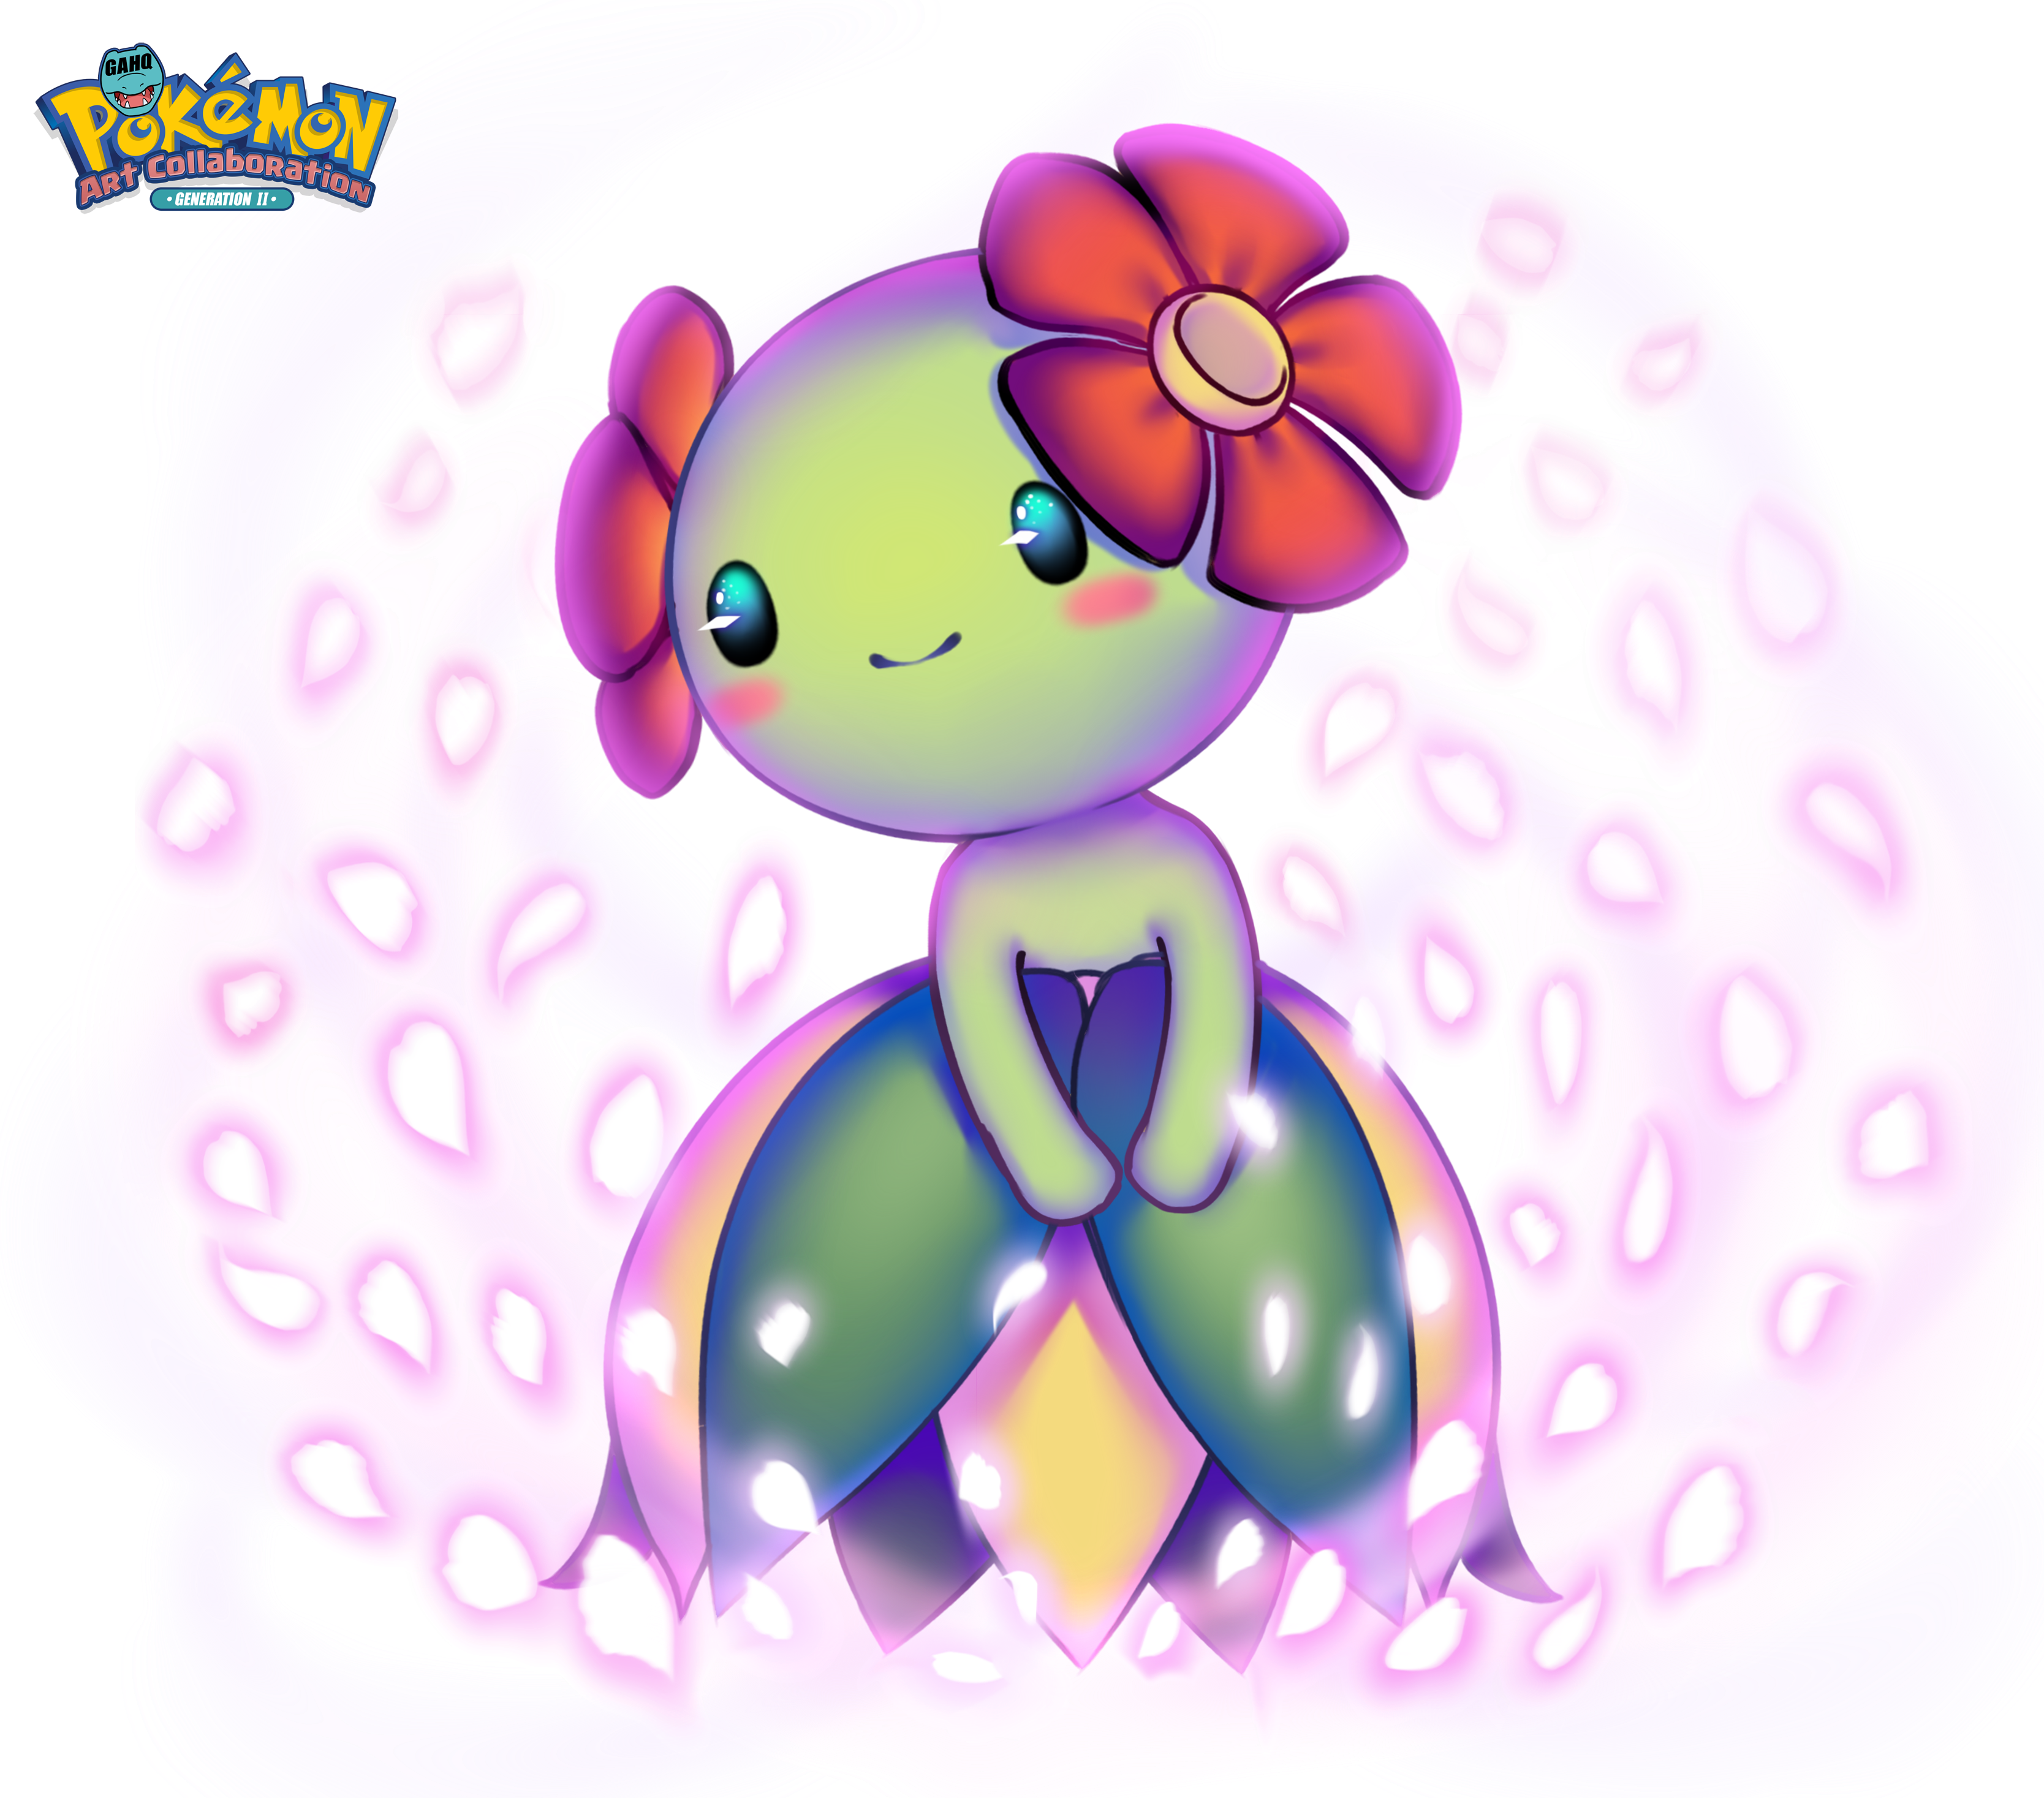 #182 Bellossom Used Petal Dance And Sunny Day In The - #182 Bellossom Used Petal Dance And Sunny Day In The (3336x2935)